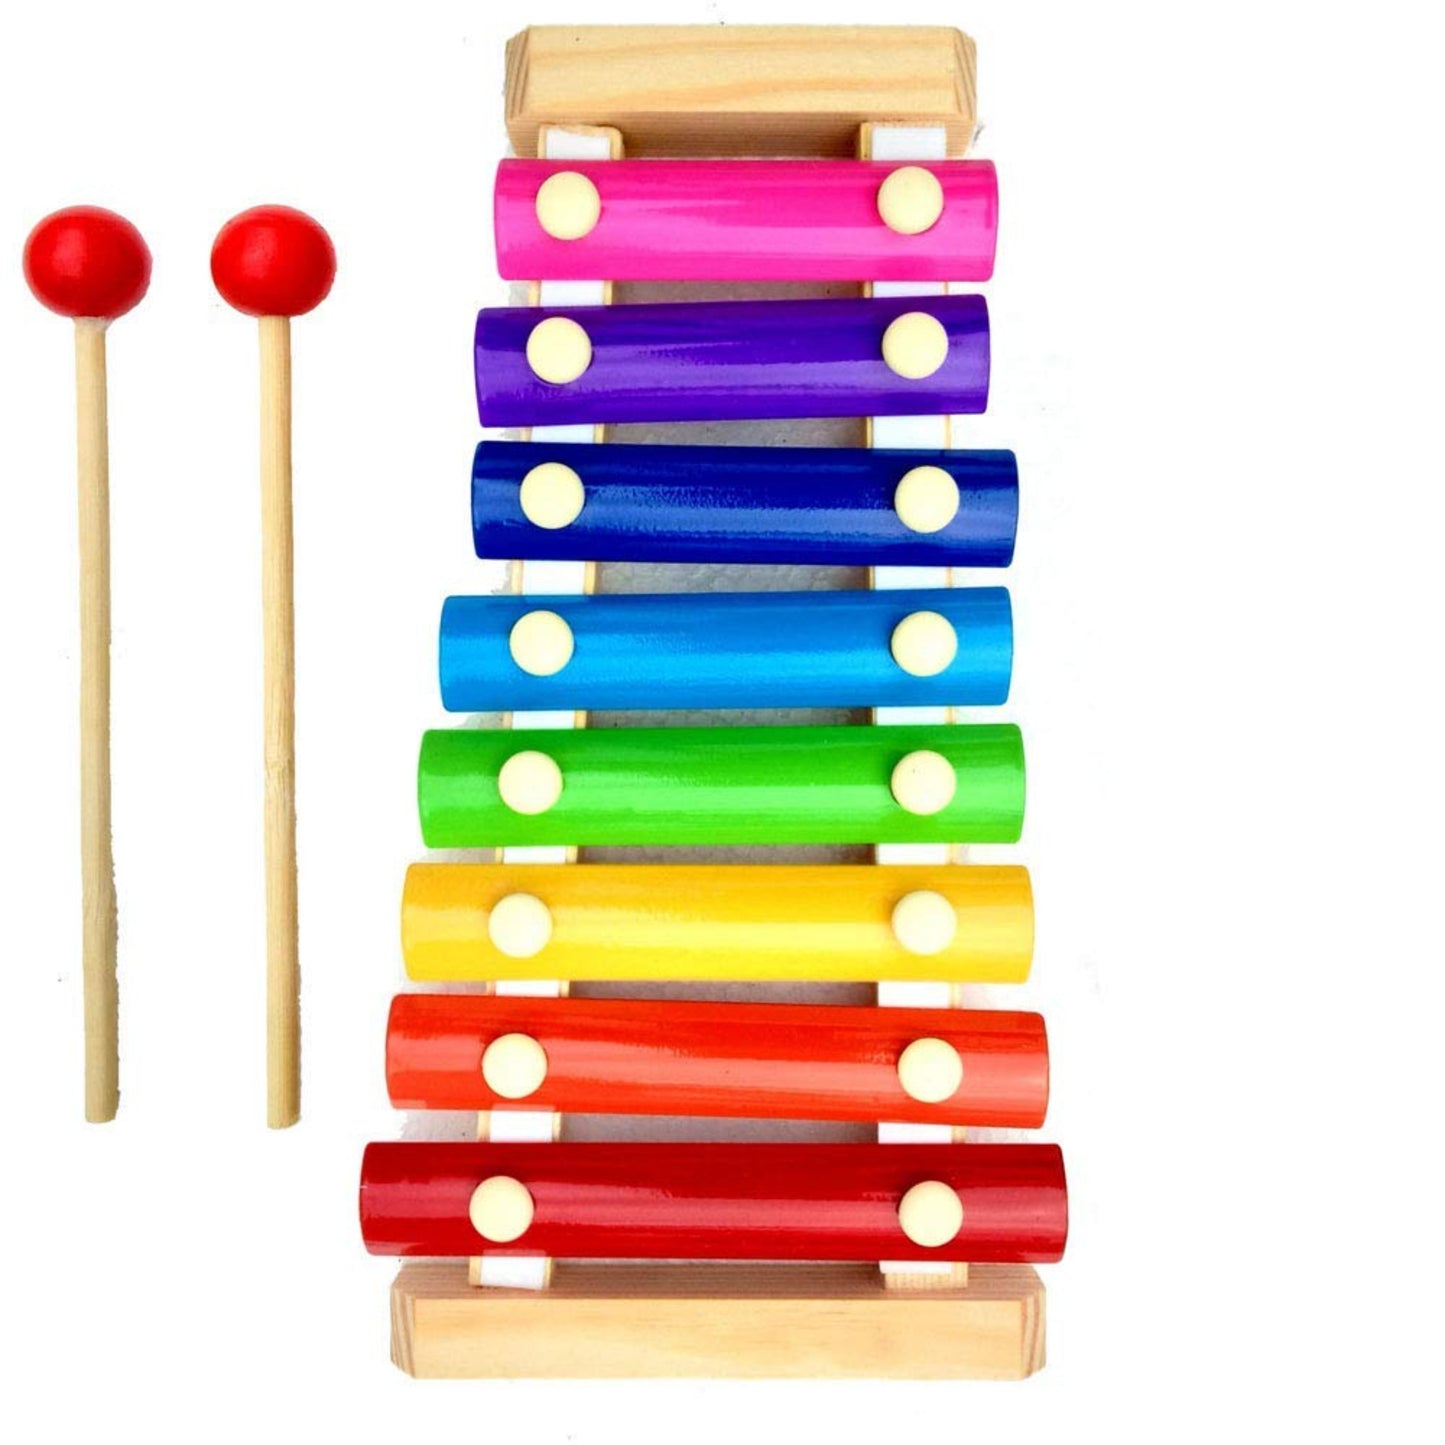 Toddler's Wooden Xylophone Musical Toy with 2 Sticks